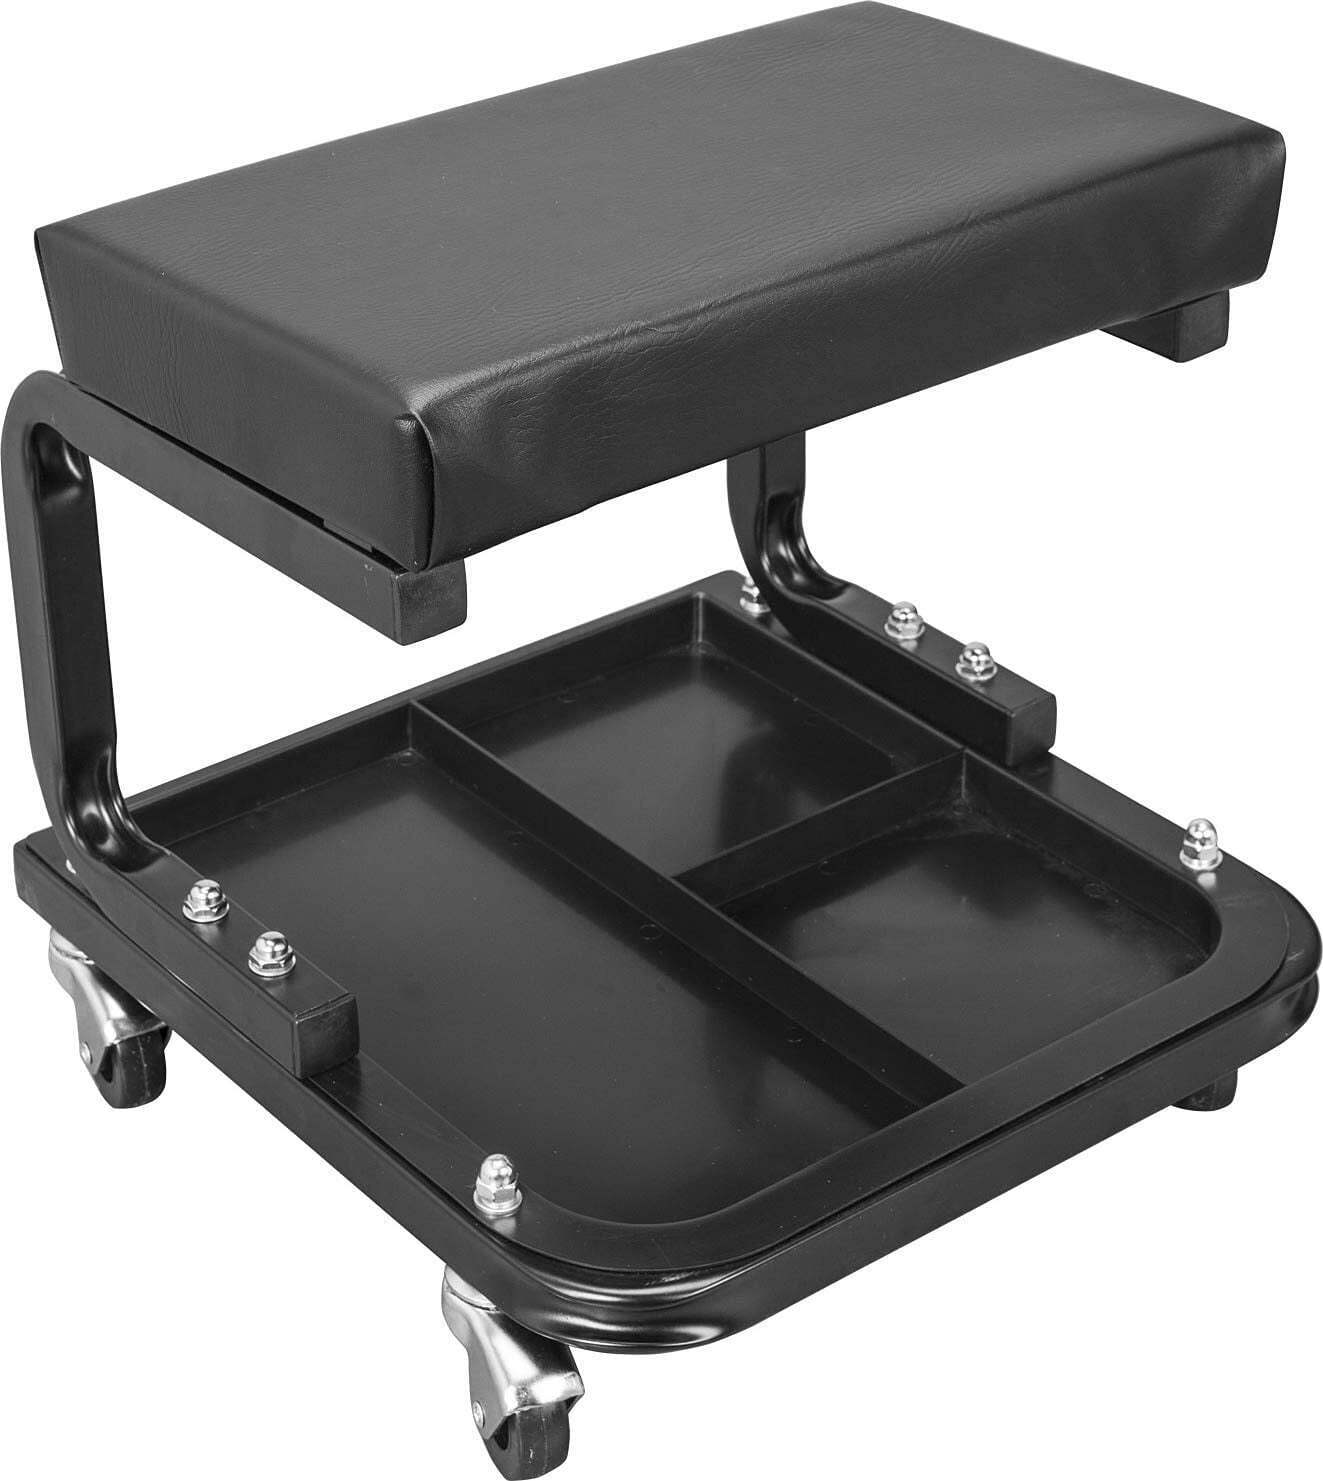 Rolling Creeper Garage/Shop Seat: Padded Mechanic Stool with Tool Tray Storage